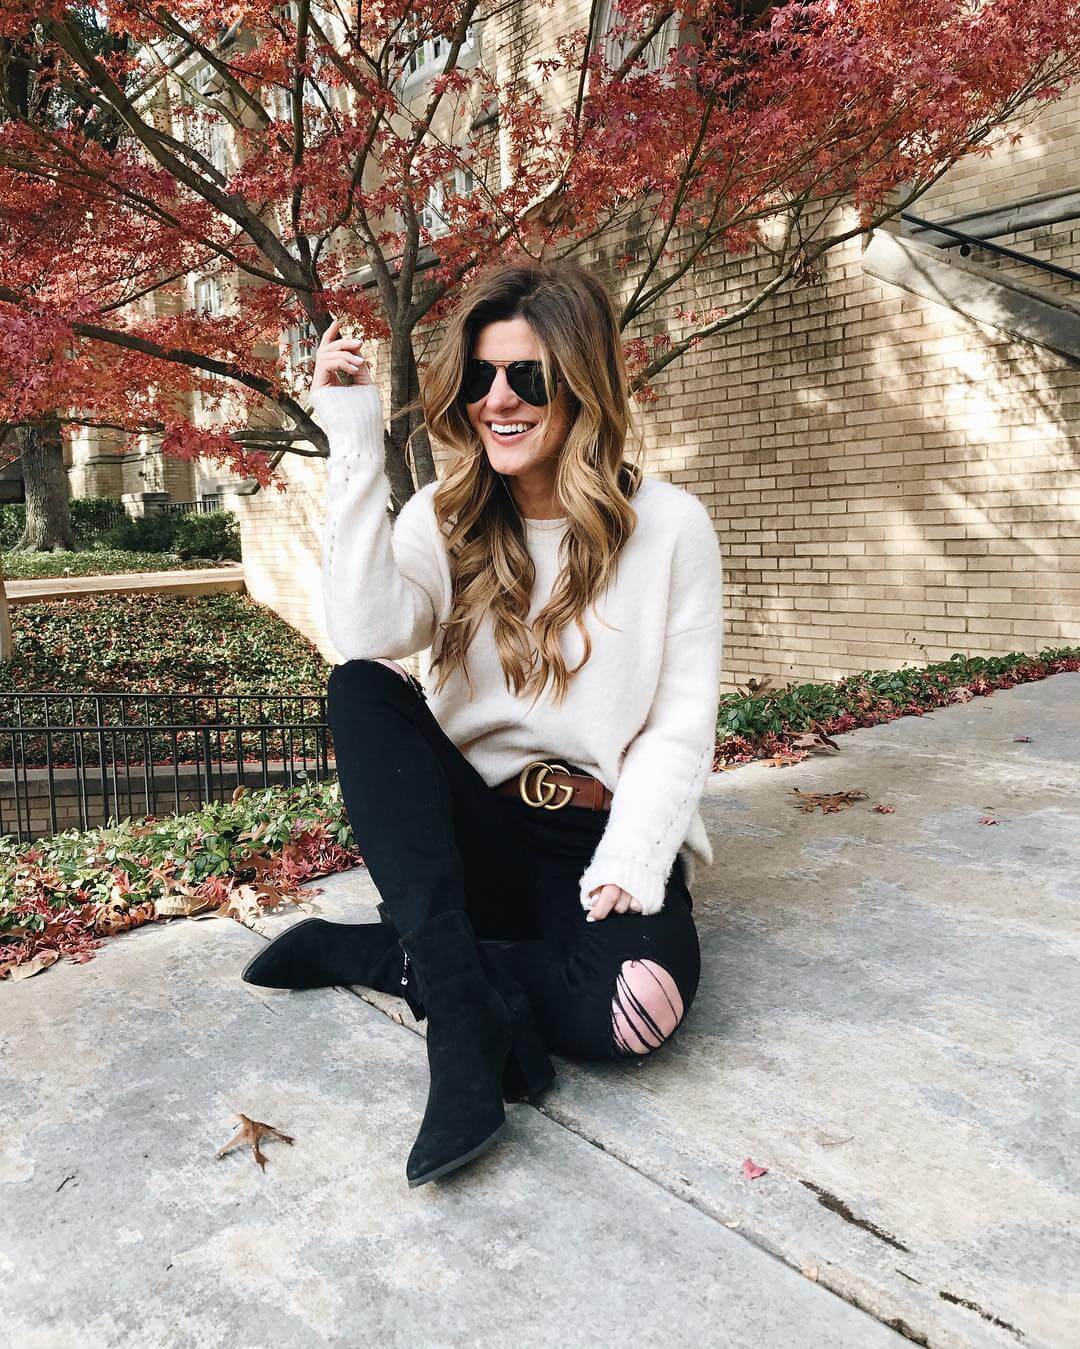 brighton the day styling black jeans, boots, oversized sweaters, and statement belt